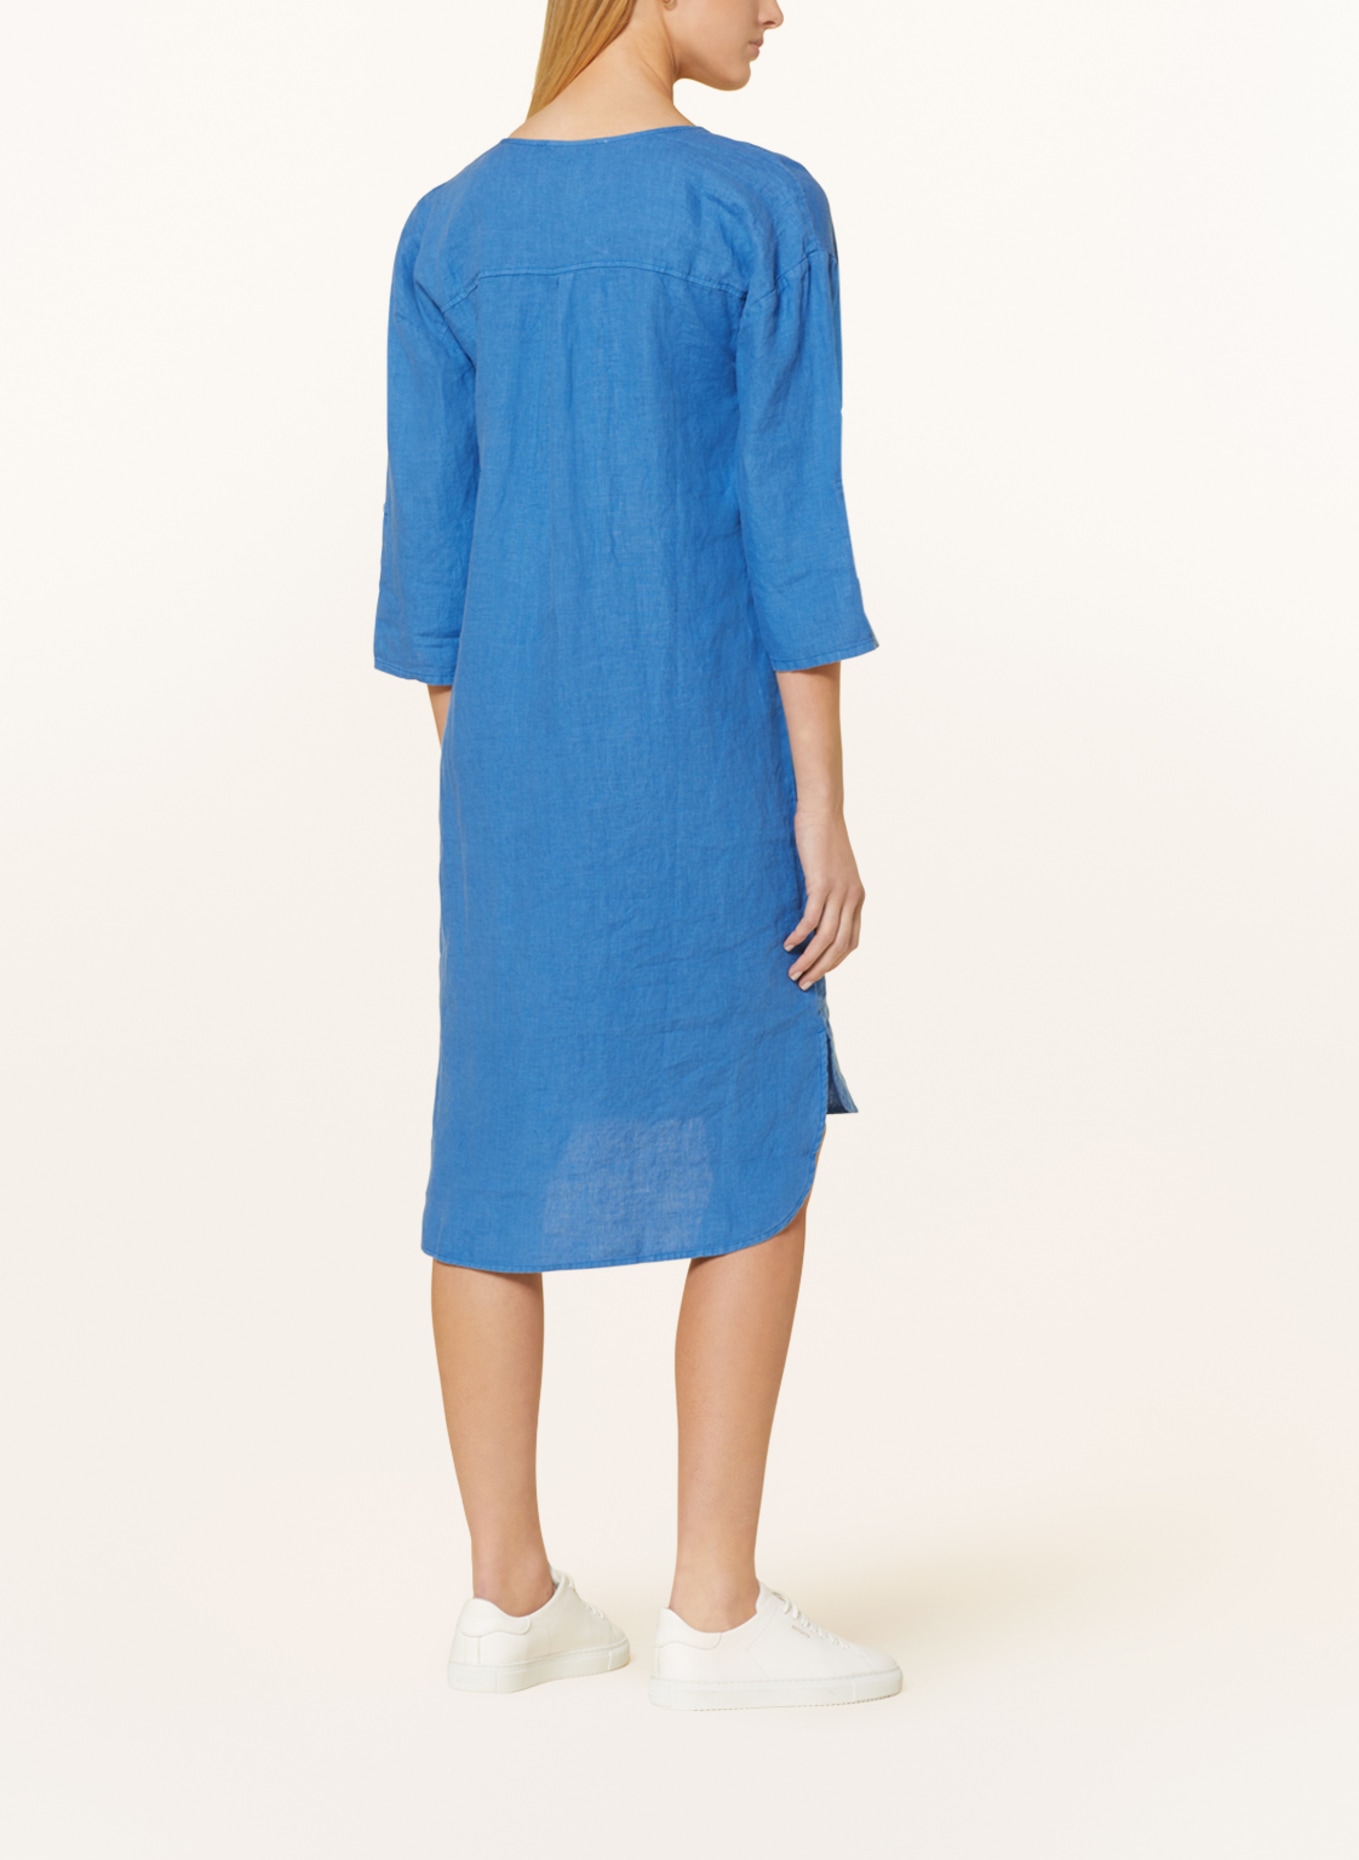 CARTOON Linen dress with 3/4 sleeves, Color: TURQUOISE (Image 3)